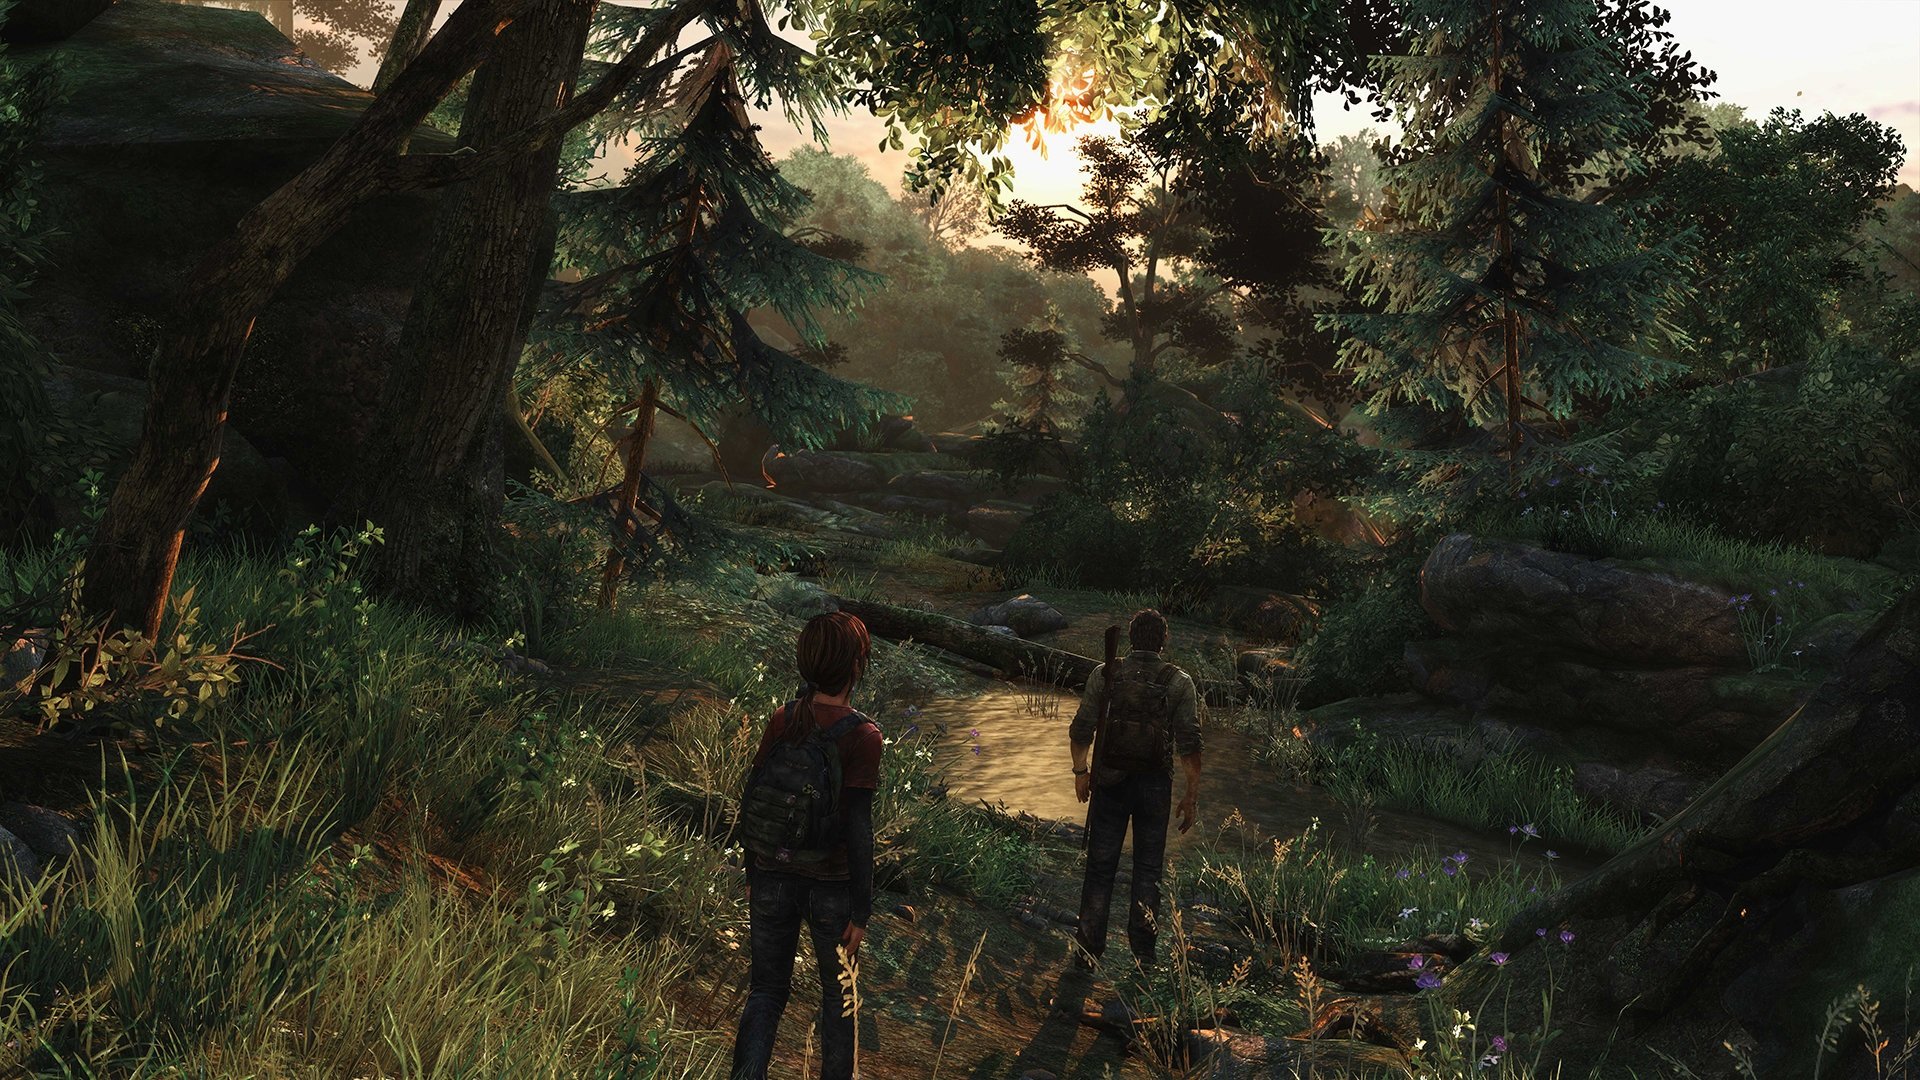 Report says The Last of Us PS5 remake is in the works at Naughty Dog -  Polygon